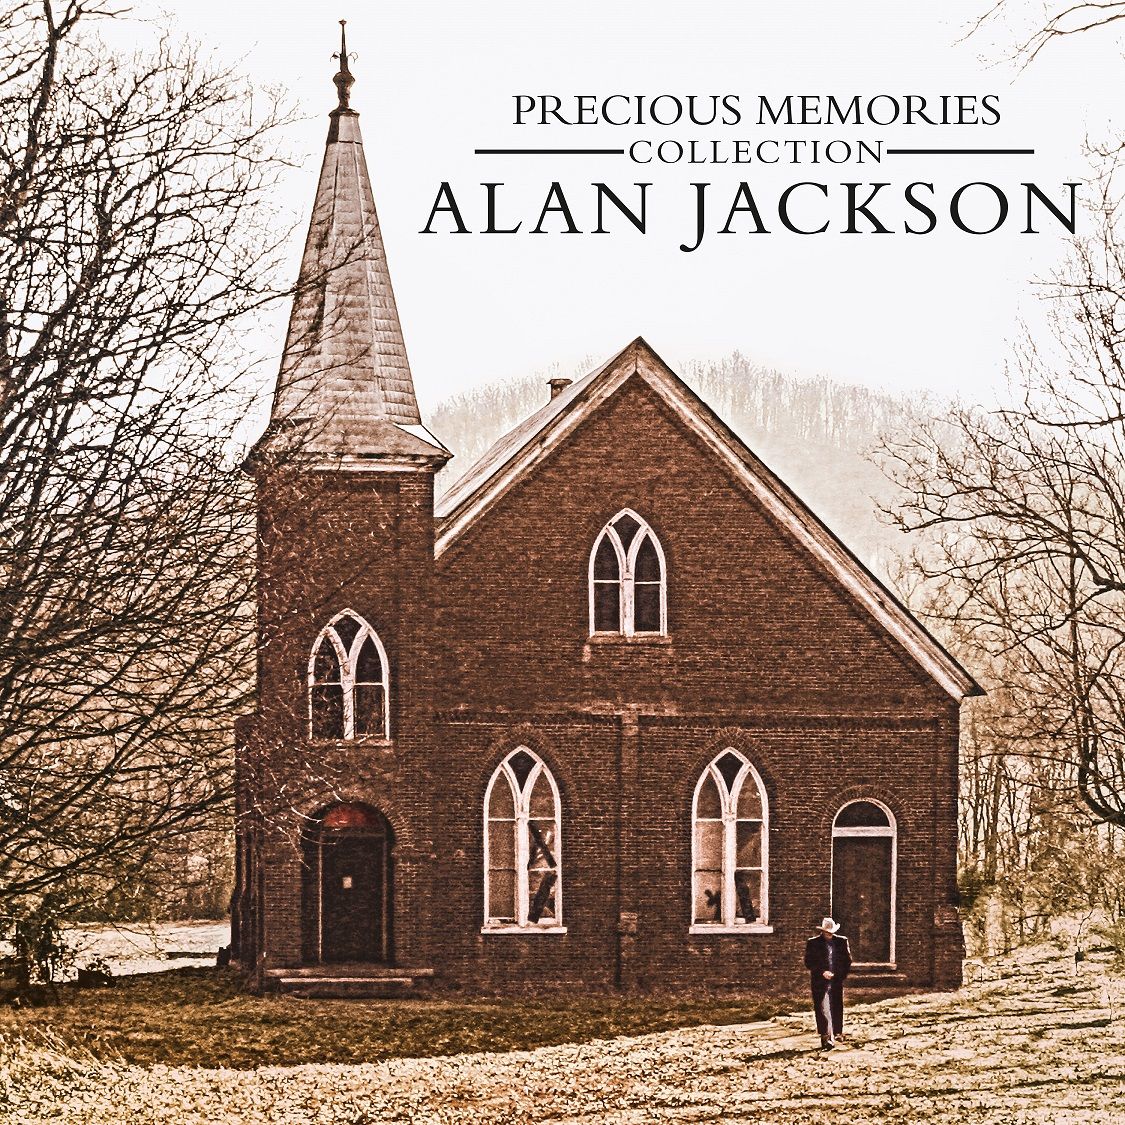 ALAN JACKSON TO RELEASE PRECIOUS MEMORIES COLLECTION  EXCLUSIVELY AT WALMART ON OCTOBER 28